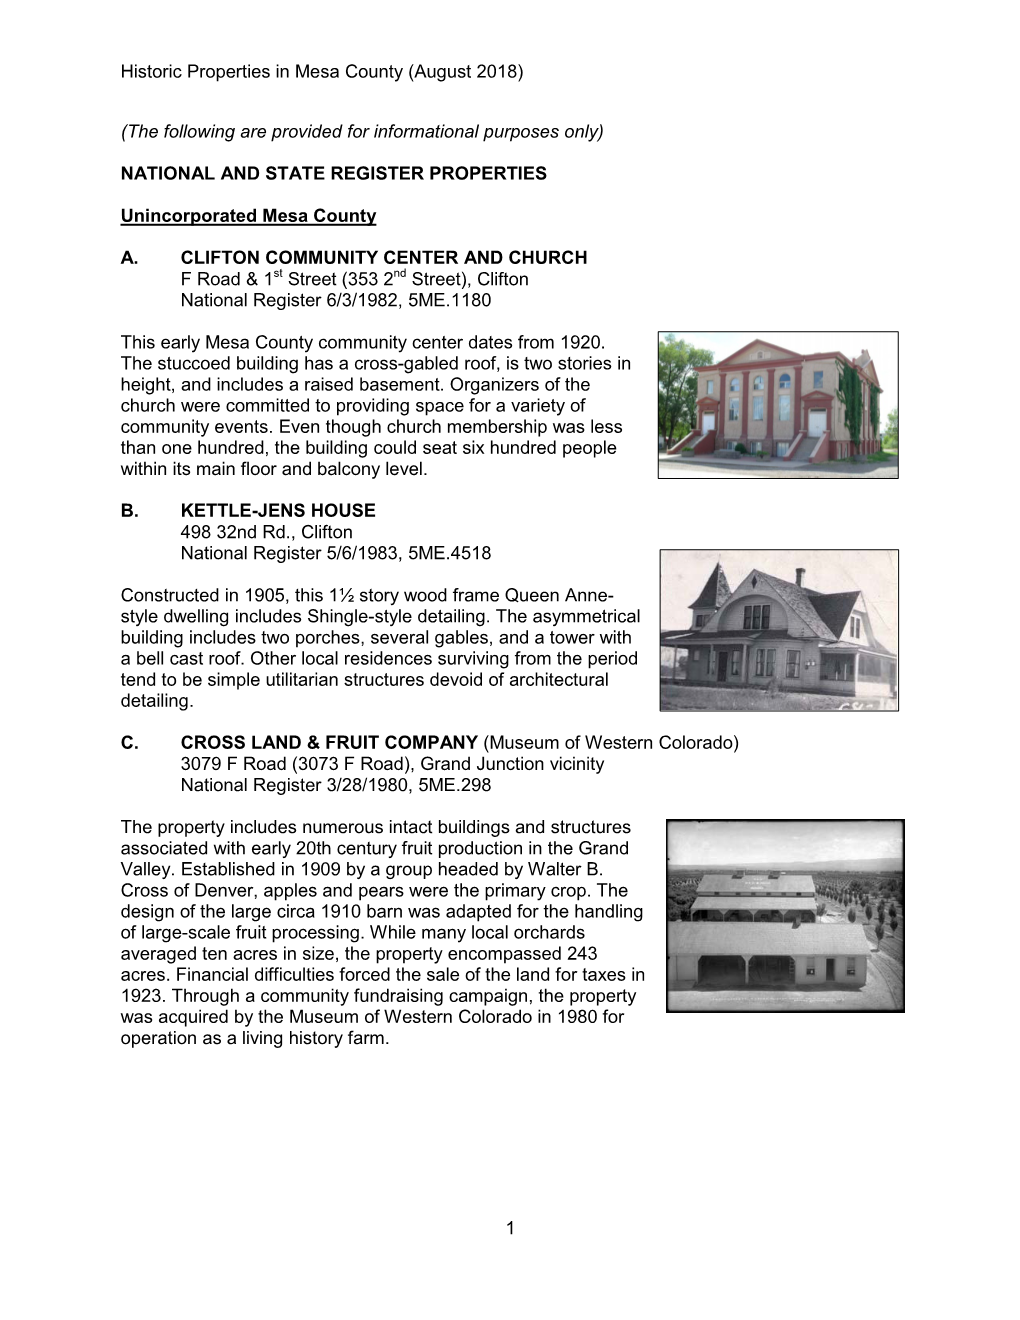 Historic Properties in Mesa County (August 2018) 1 (The Following Are